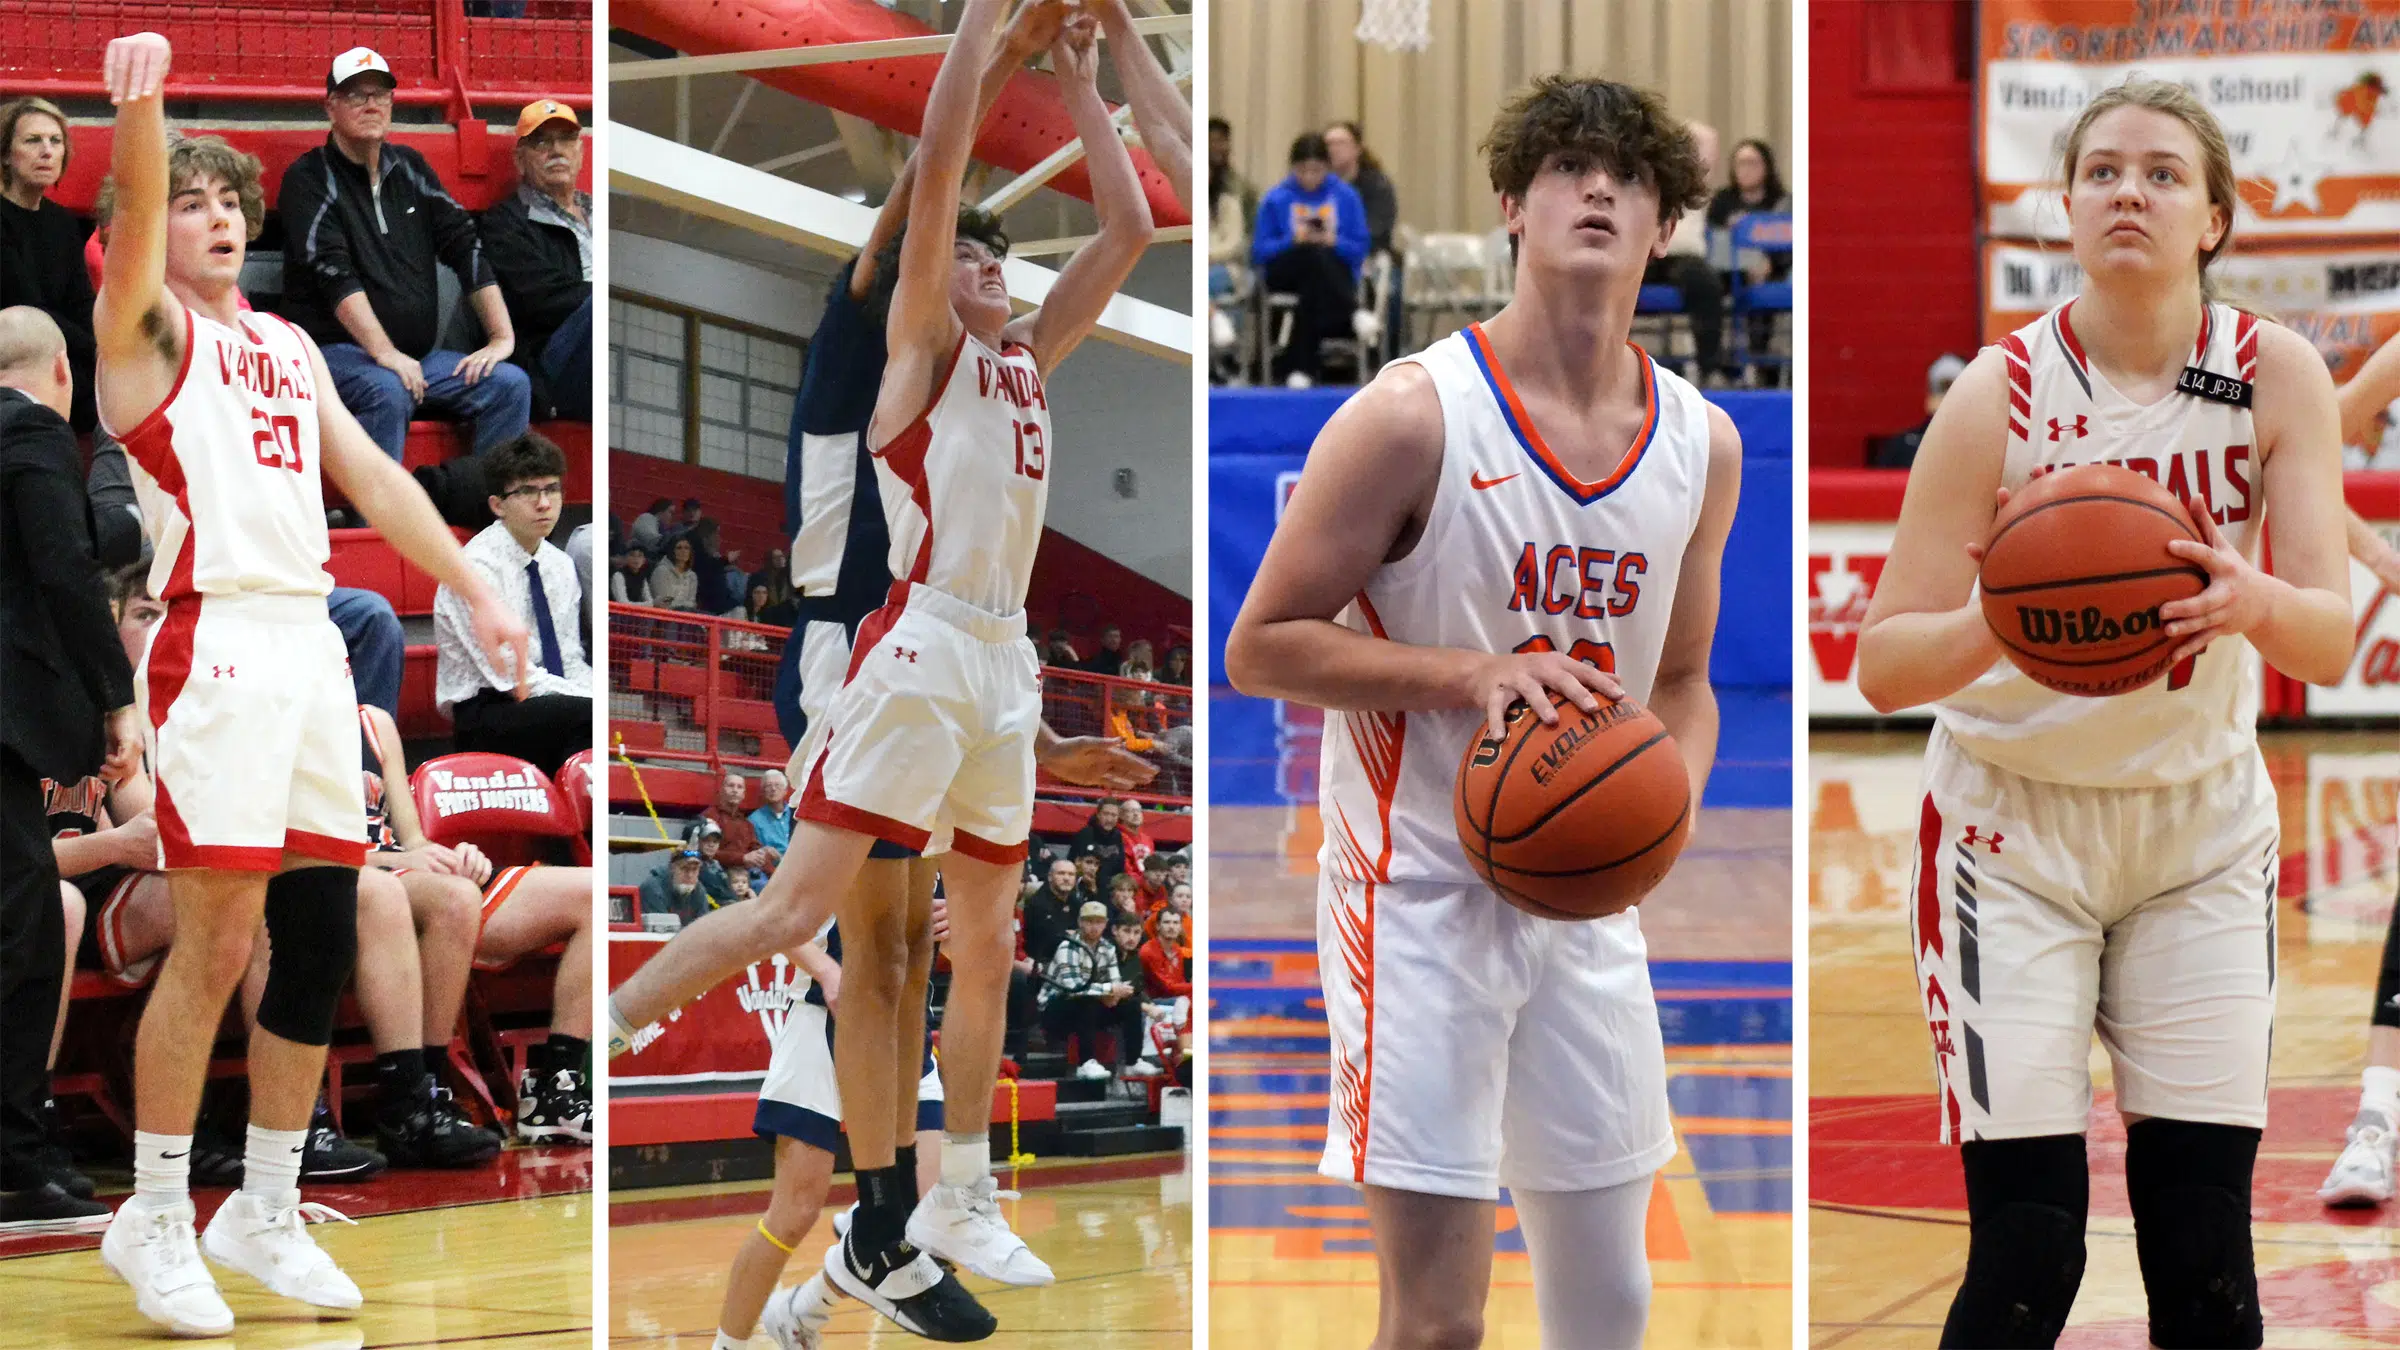 4 area athletes get ready for Carlinville Rotary All-Star Classic tomorrow